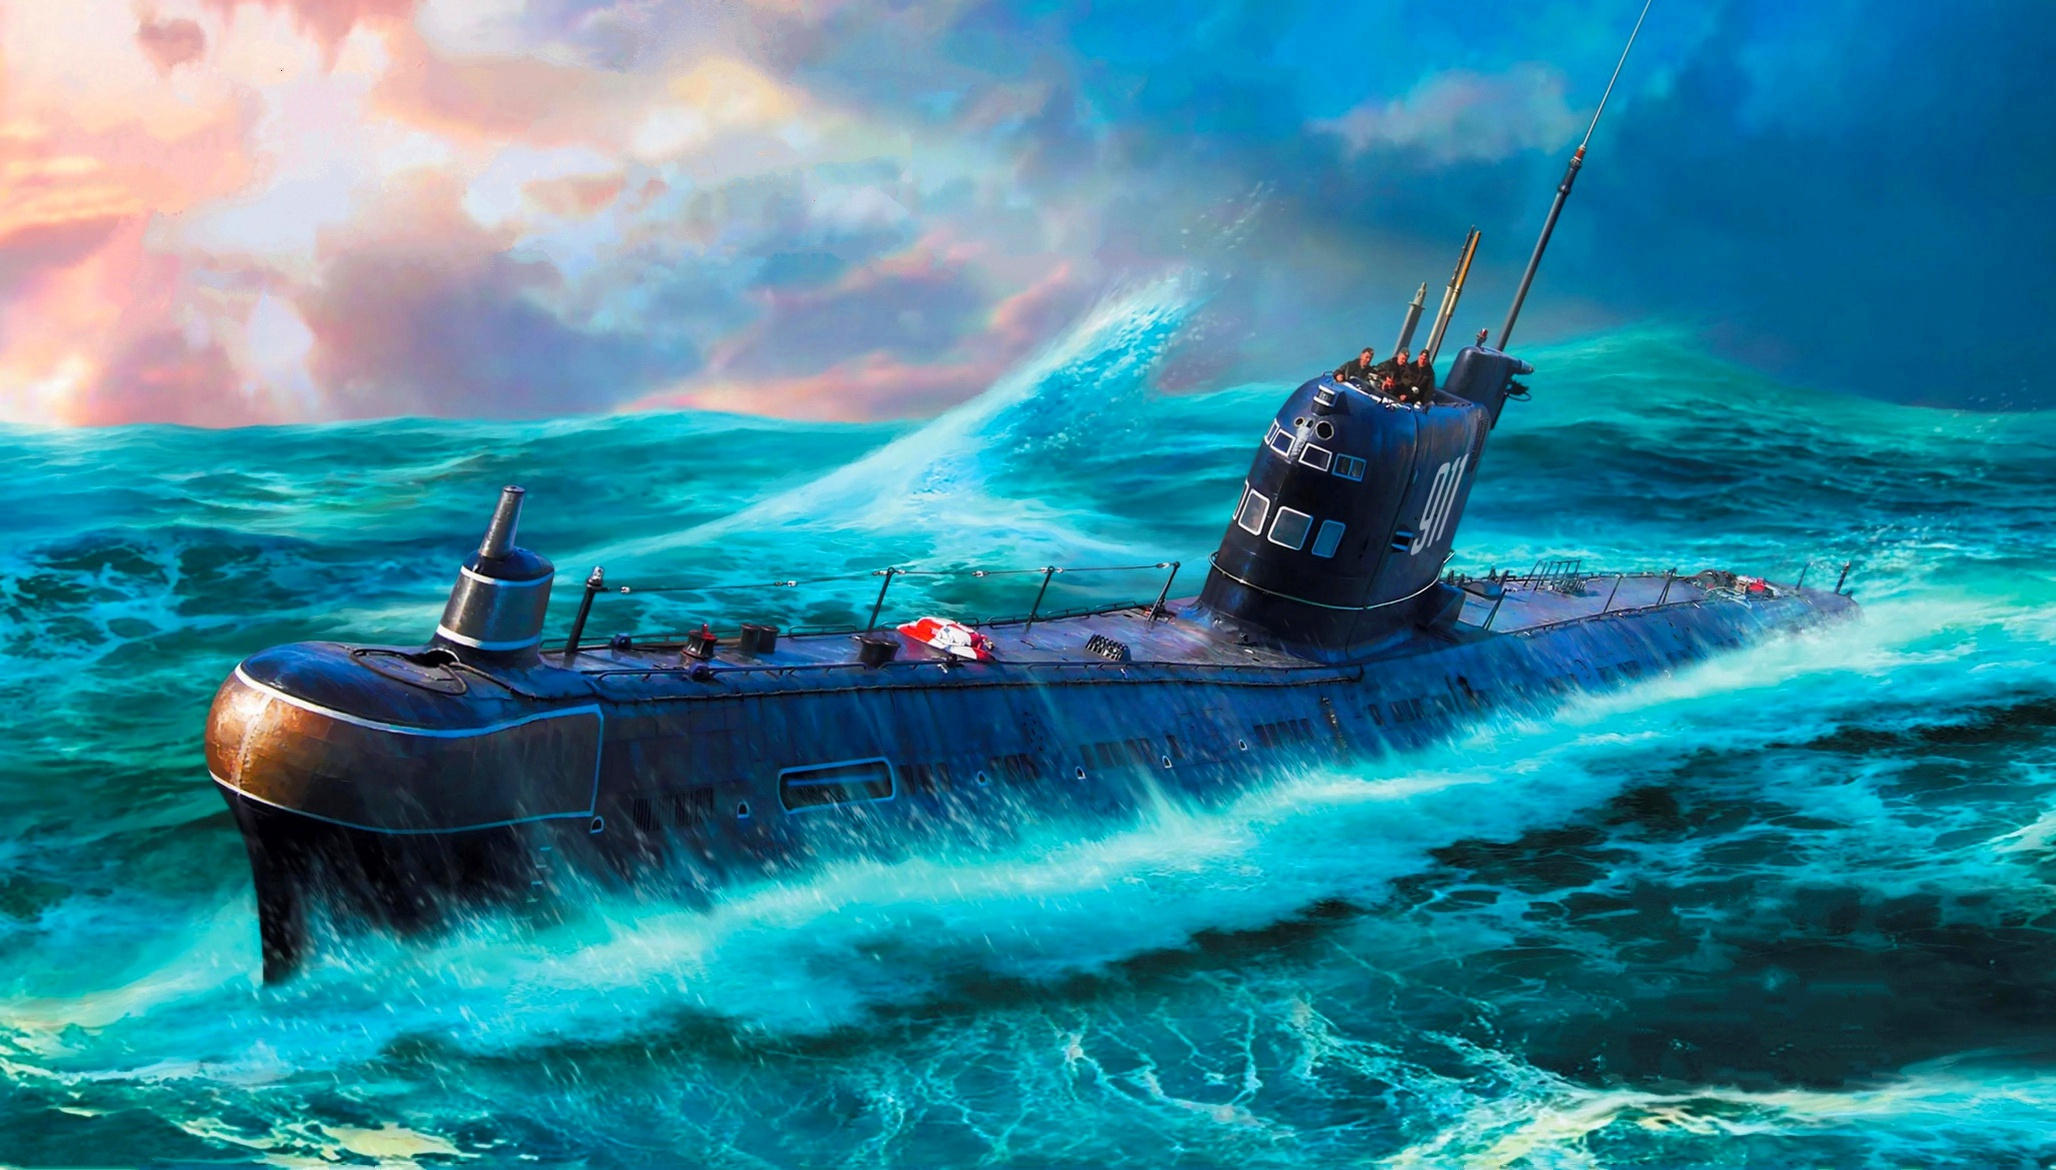 2056x1170 90+ Submarine HD Wallpapers and Backgrounds